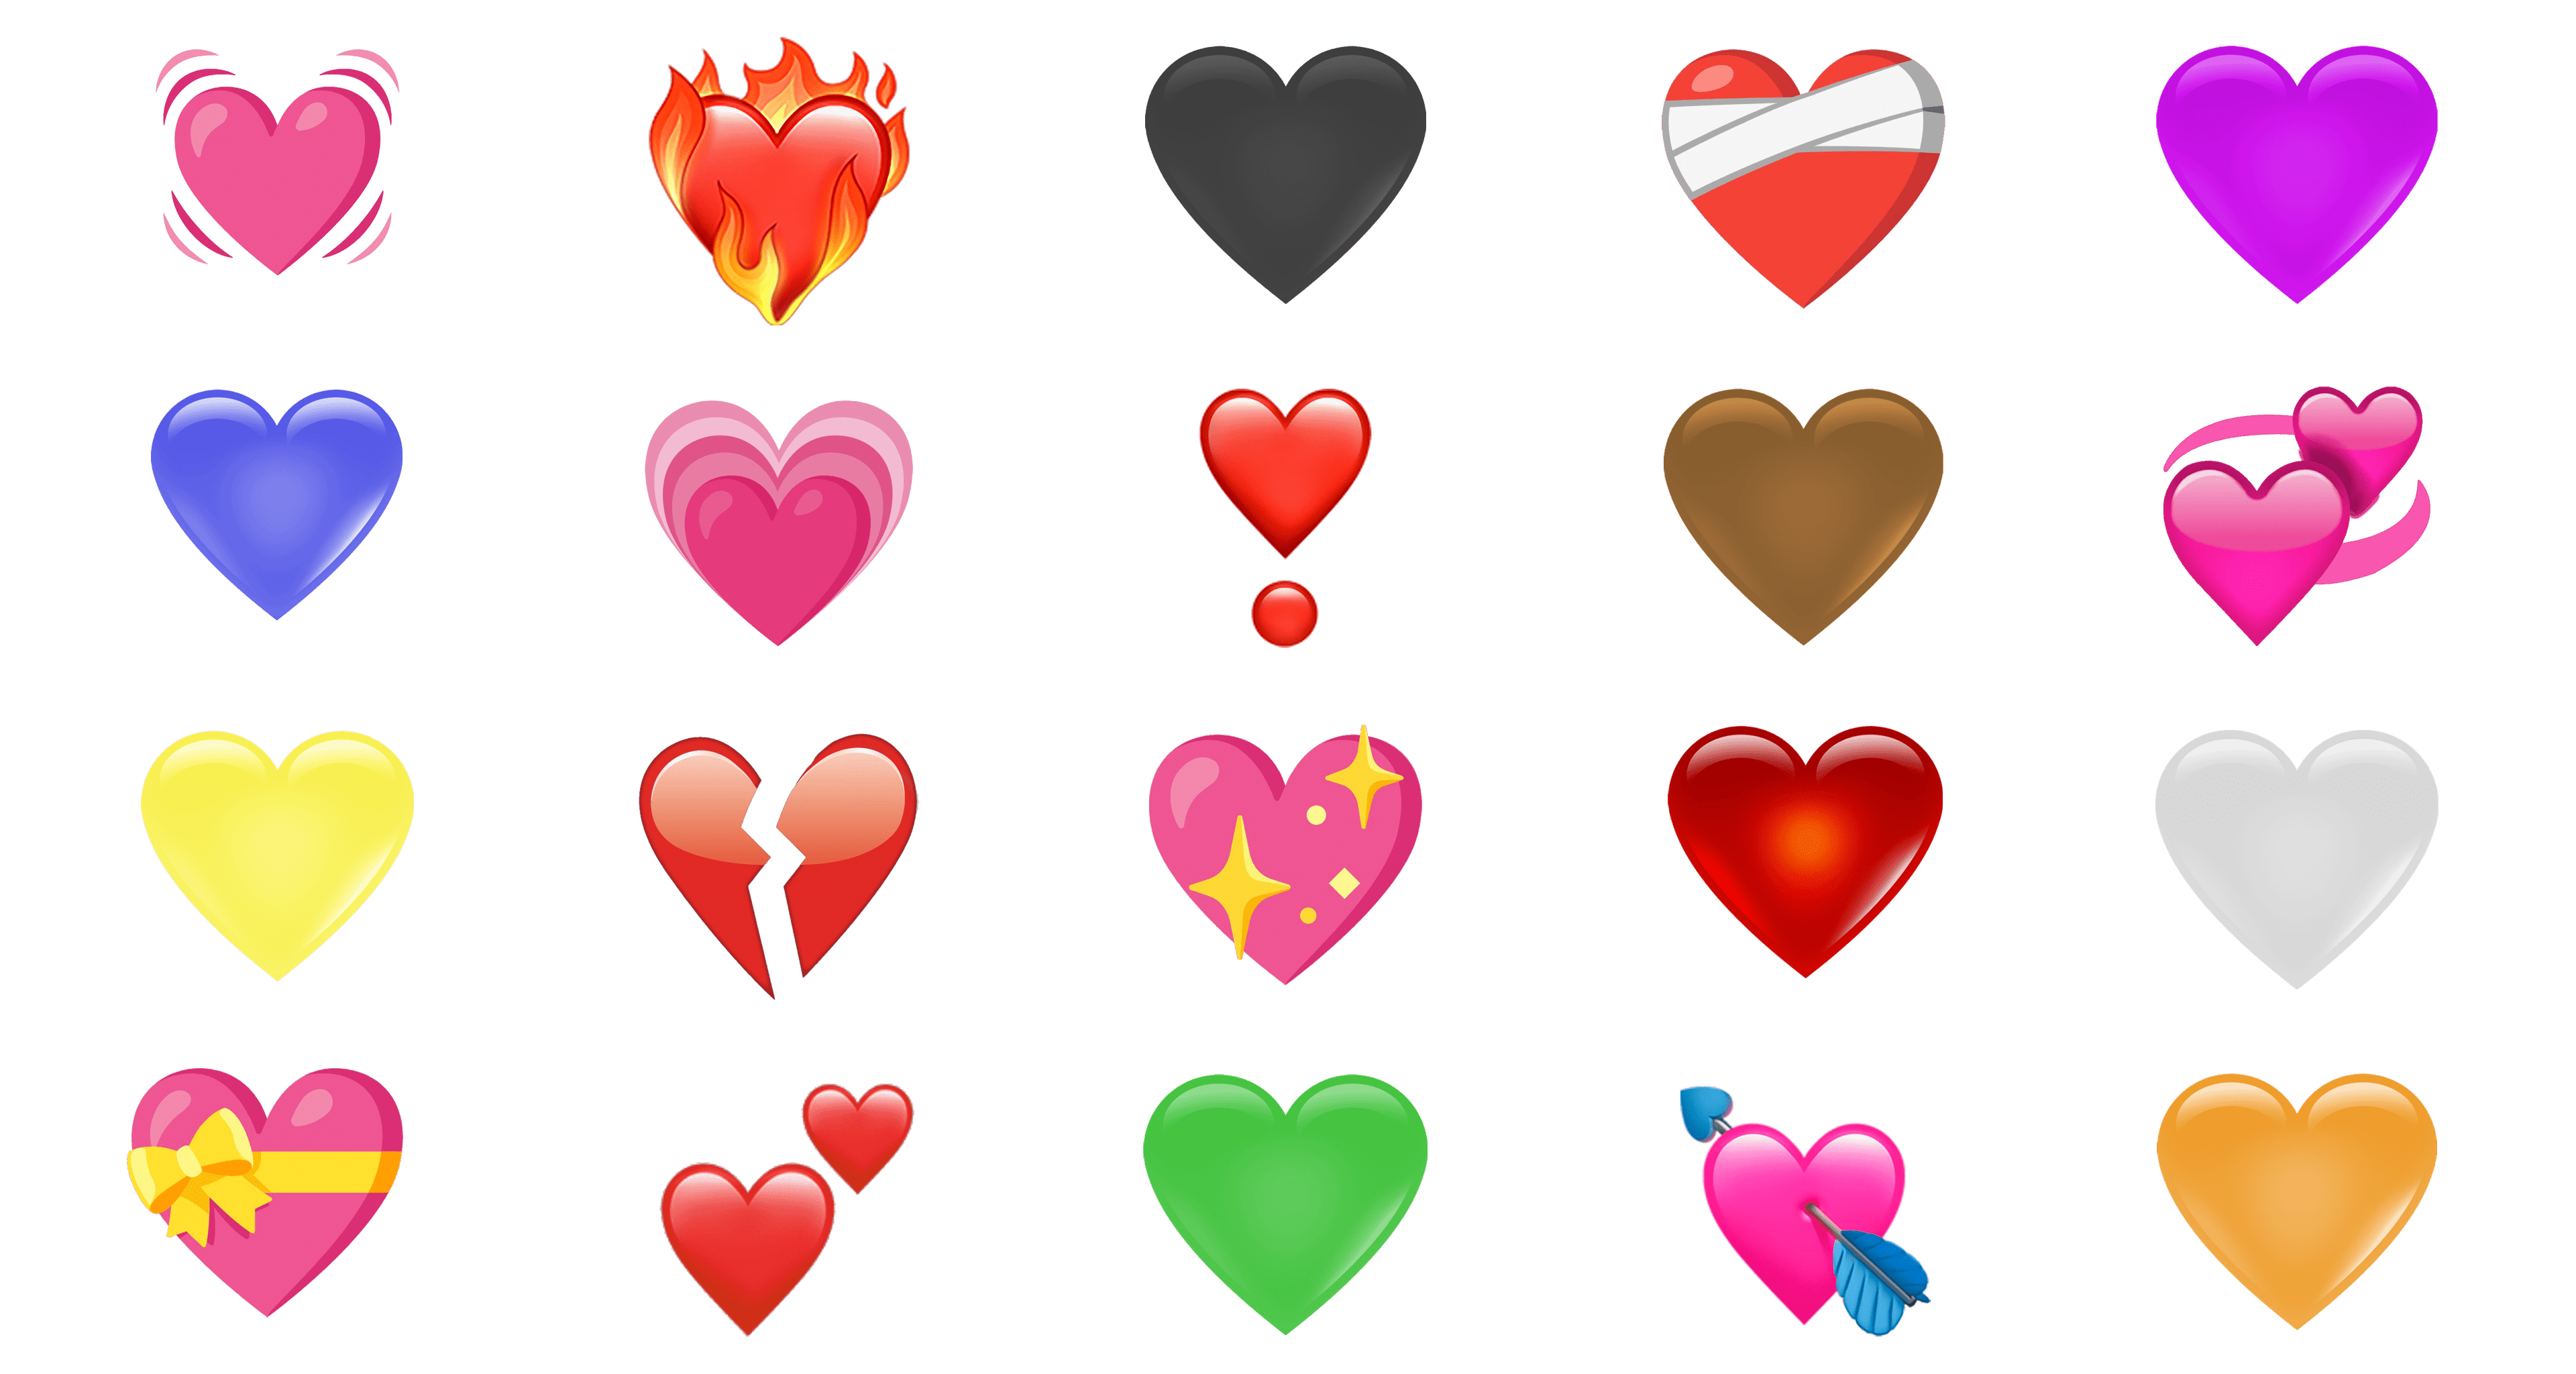 Heart Emoji Meanings Color Matters 